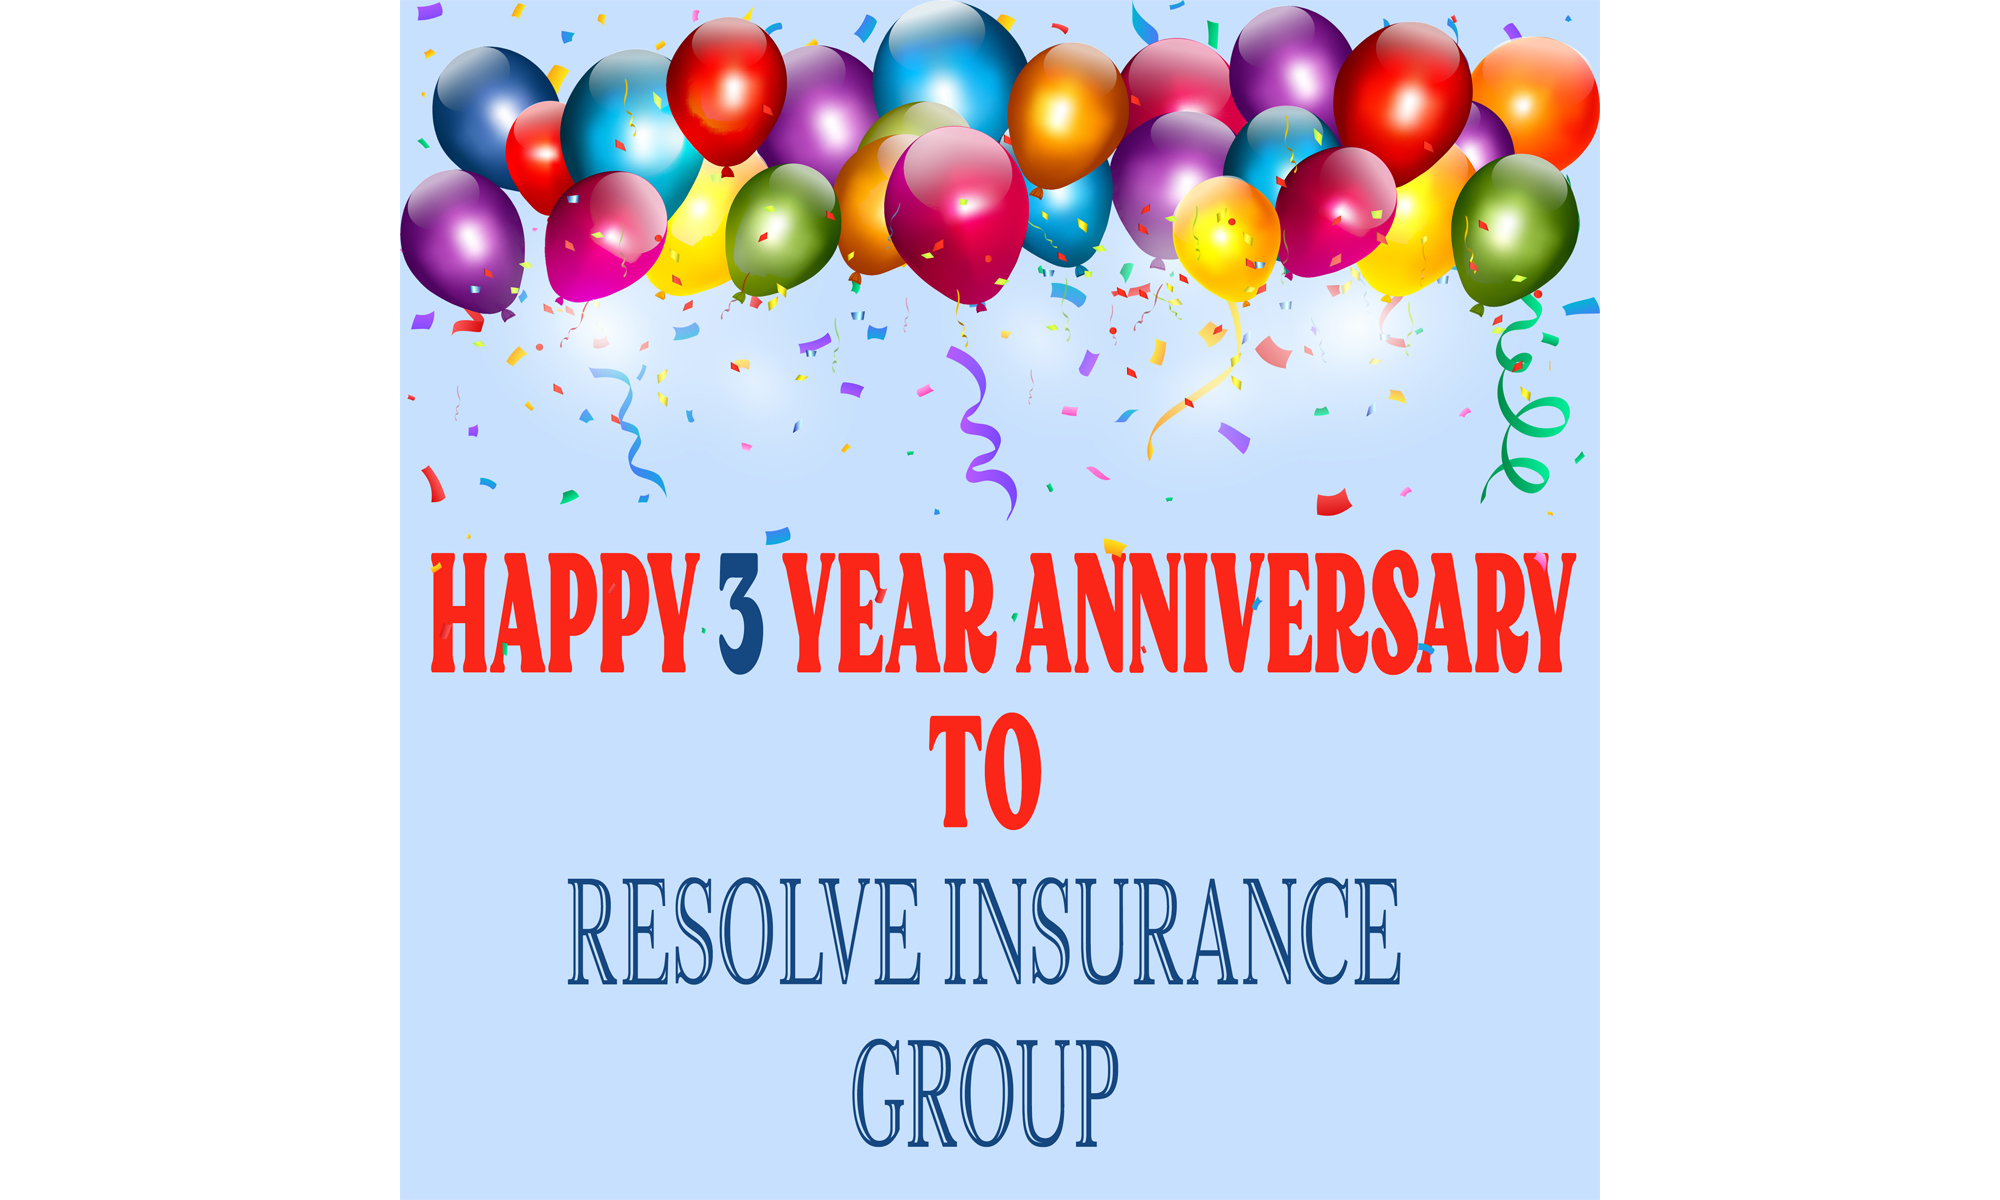 Happy 3 Year Anniversary to Resolve Insurance Group!